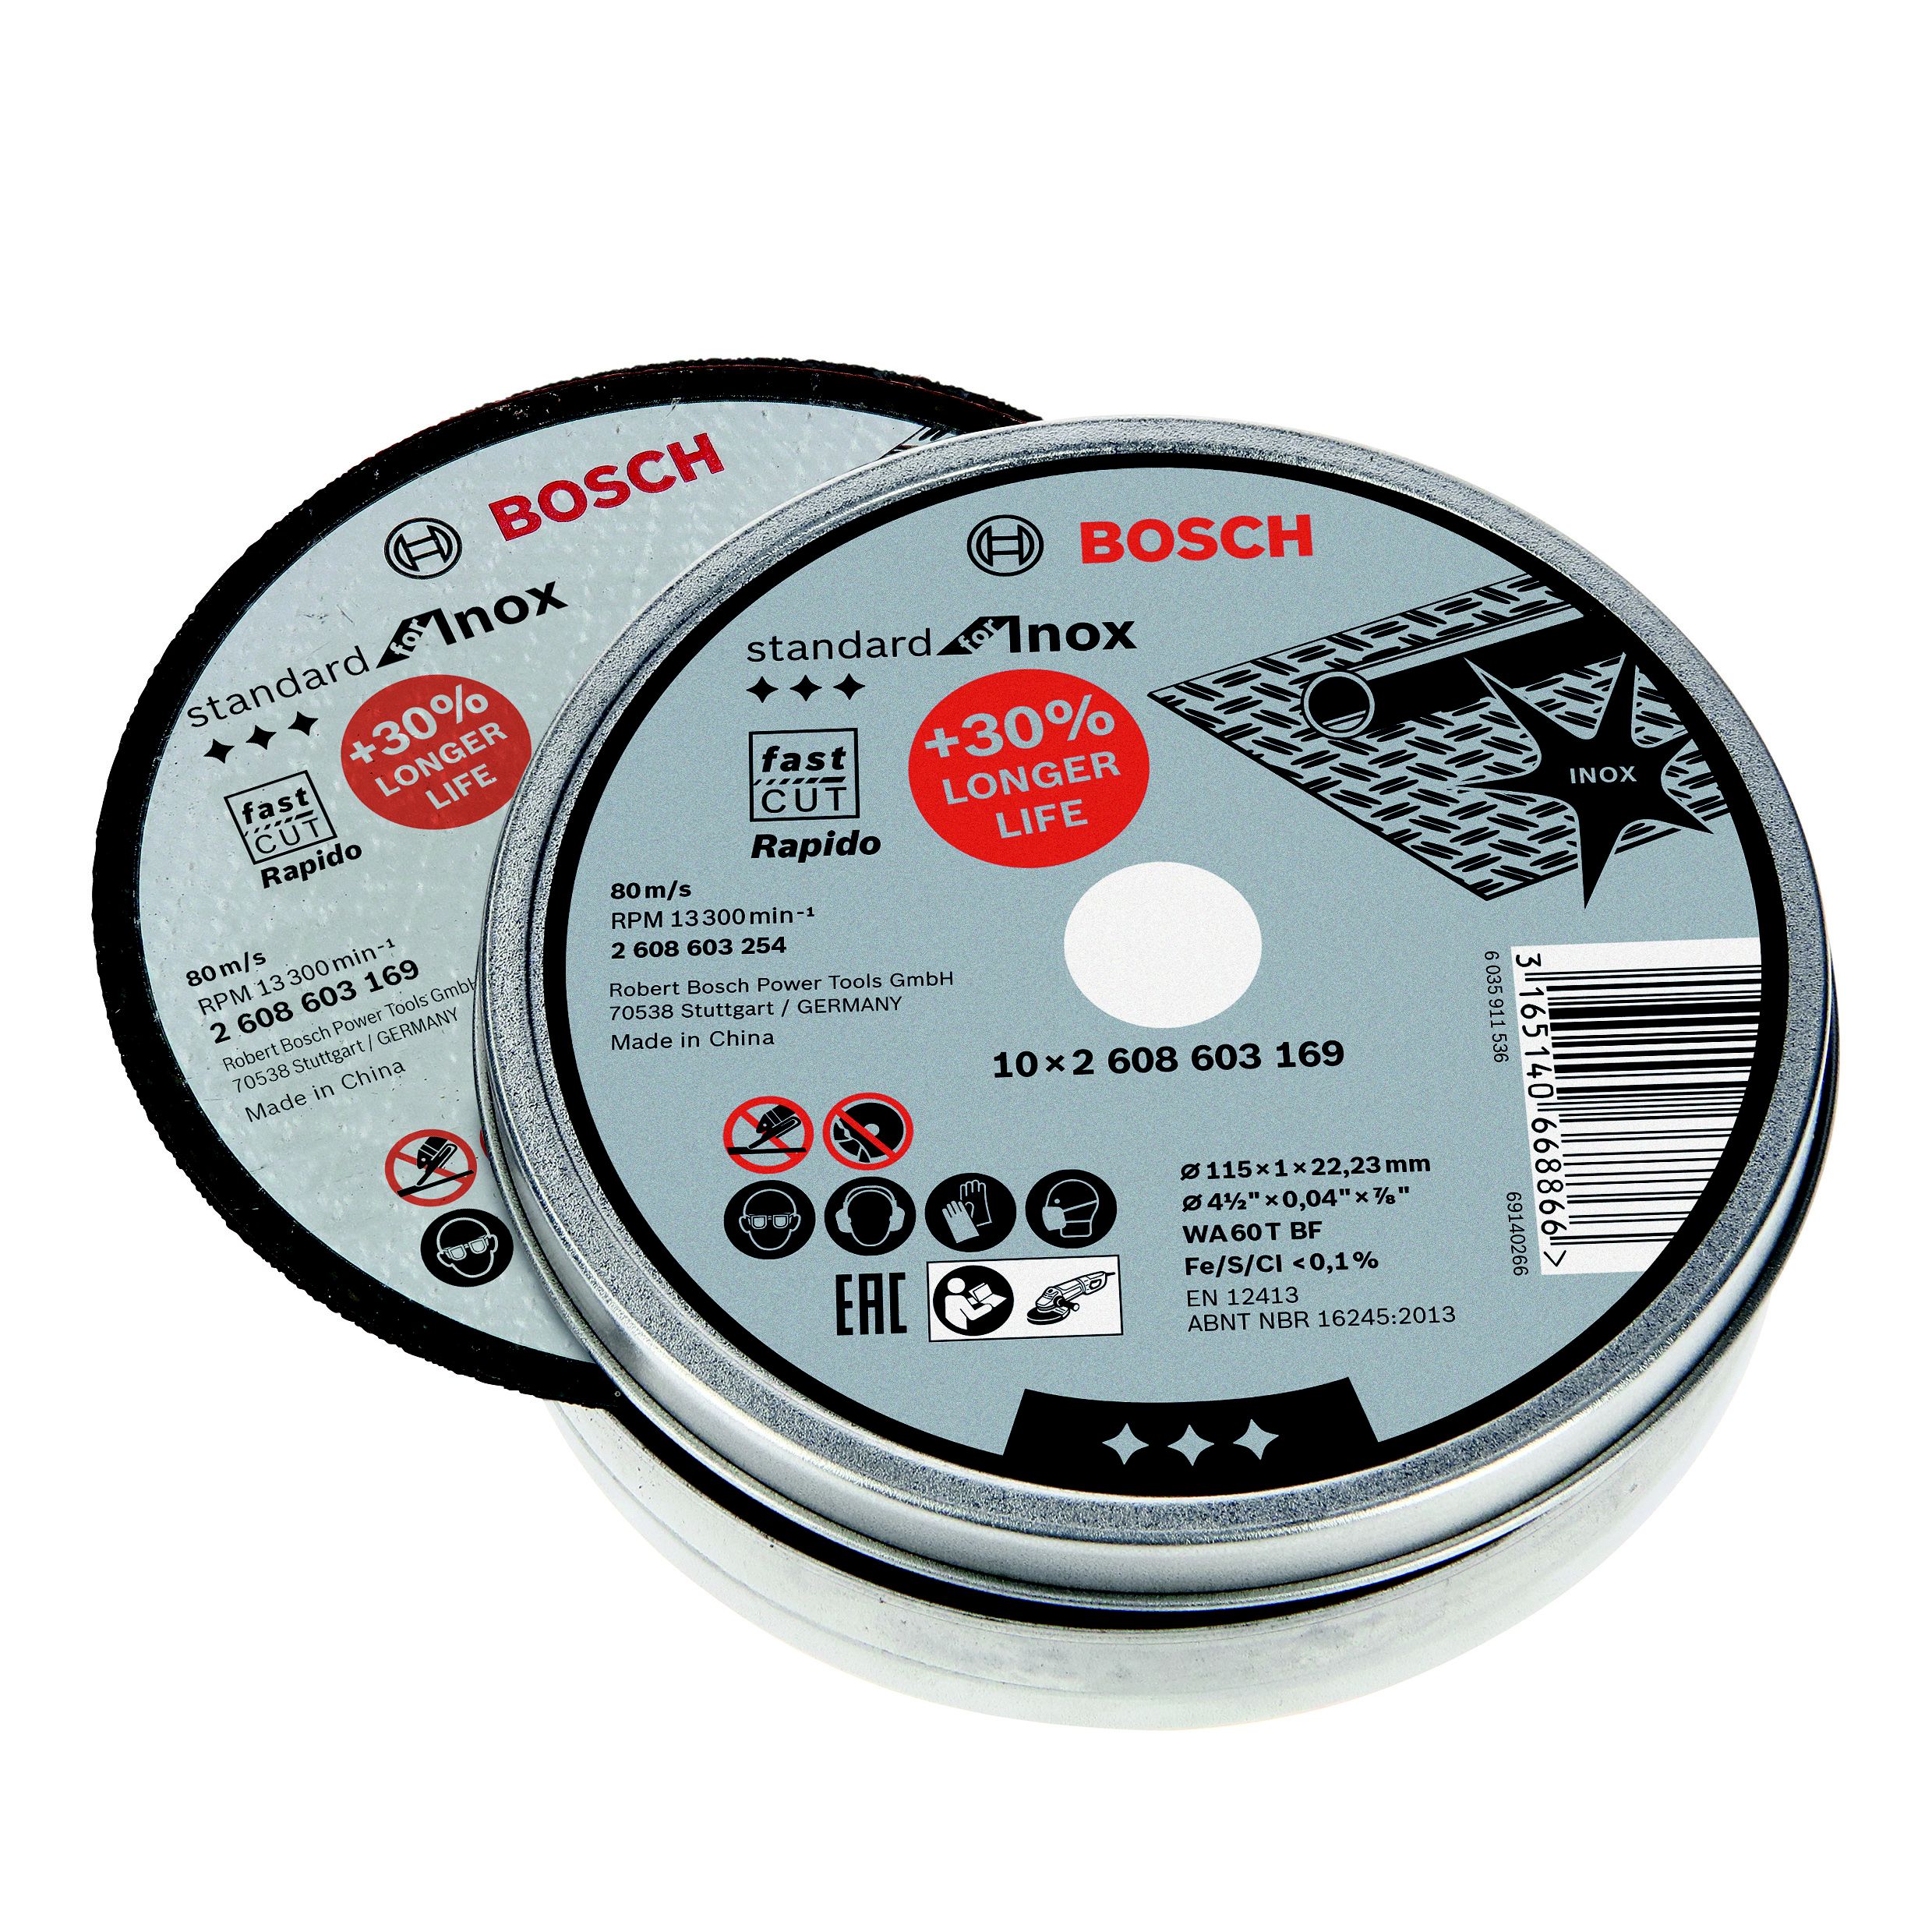 Bosch Grinding disc (Dia)115mm, Pack of 10